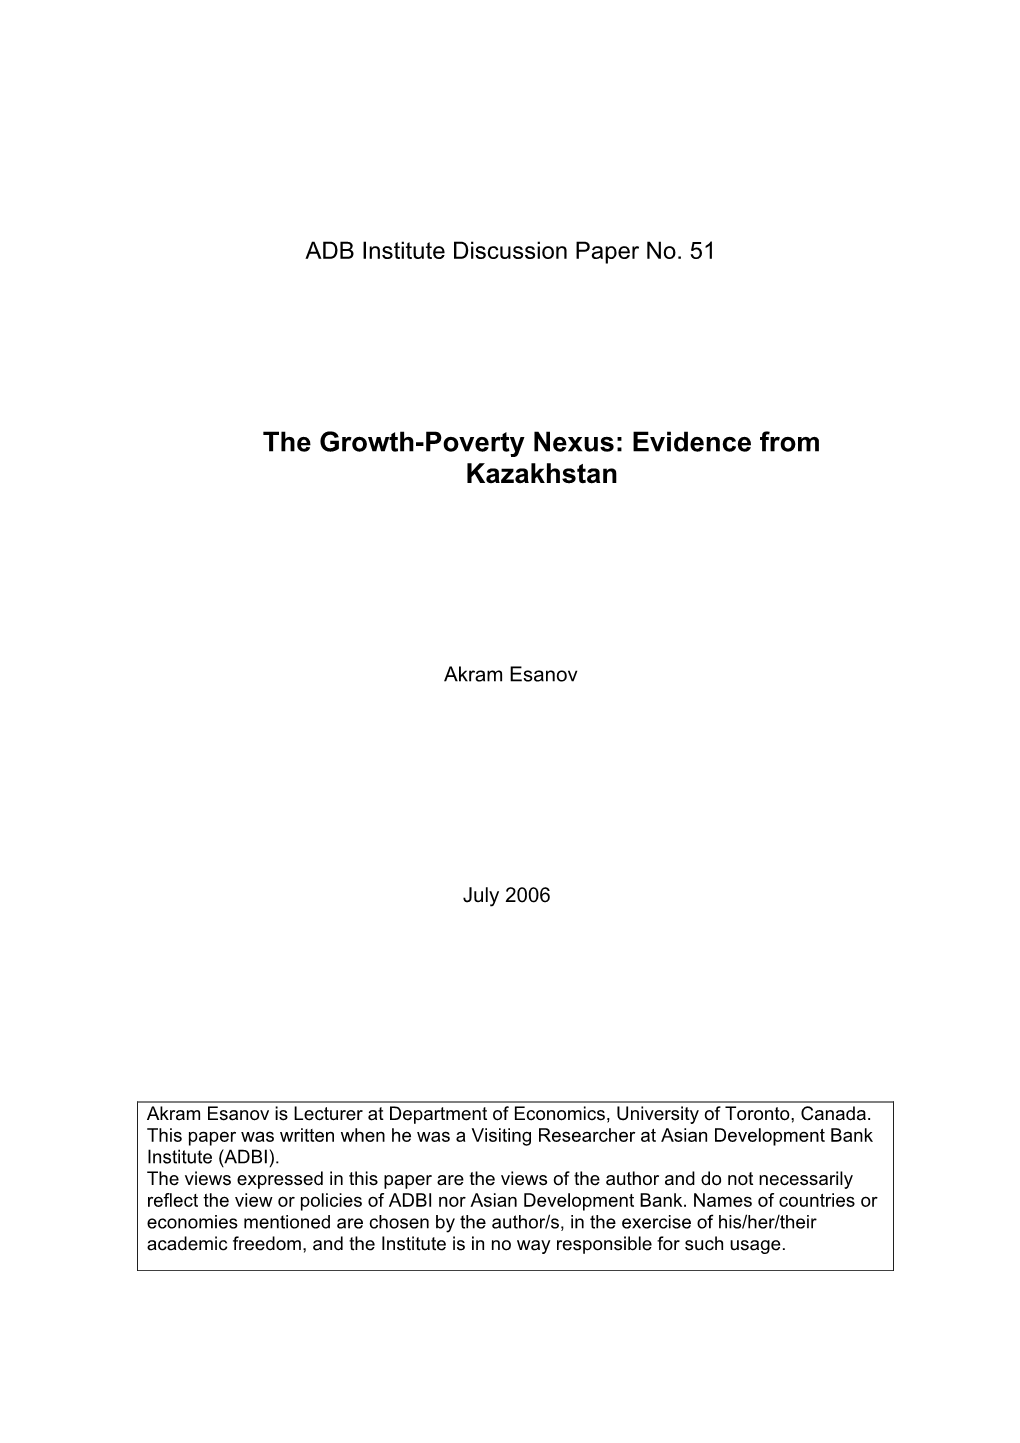 The Growth-Poverty Nexus: Evidence from Kazakhstan